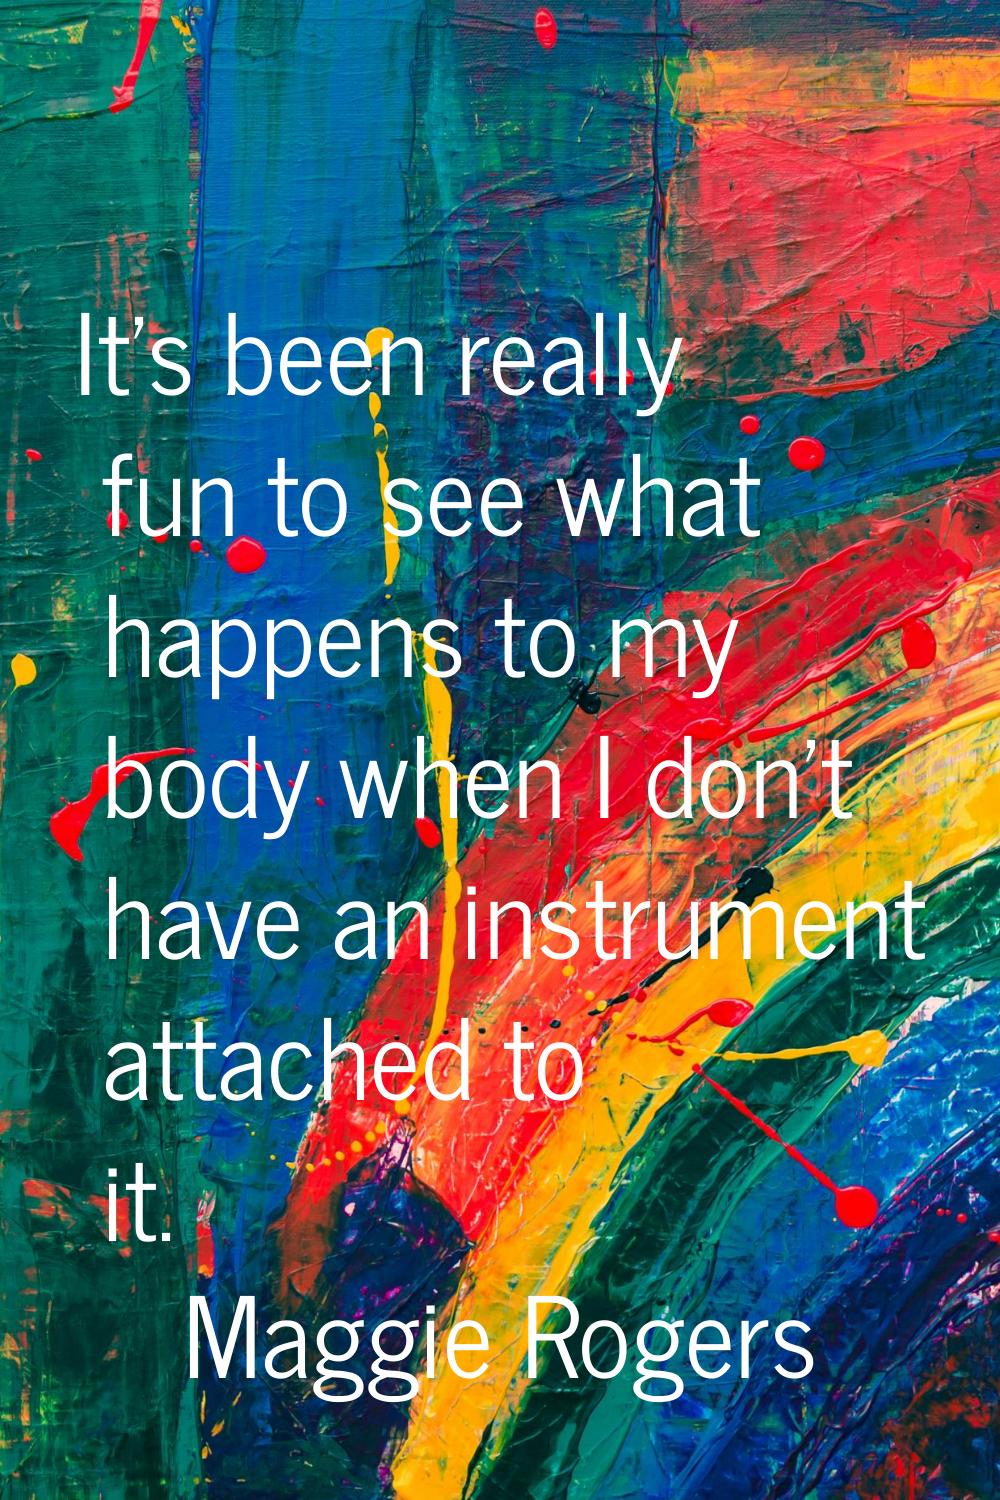 It's been really fun to see what happens to my body when I don't have an instrument attached to it.